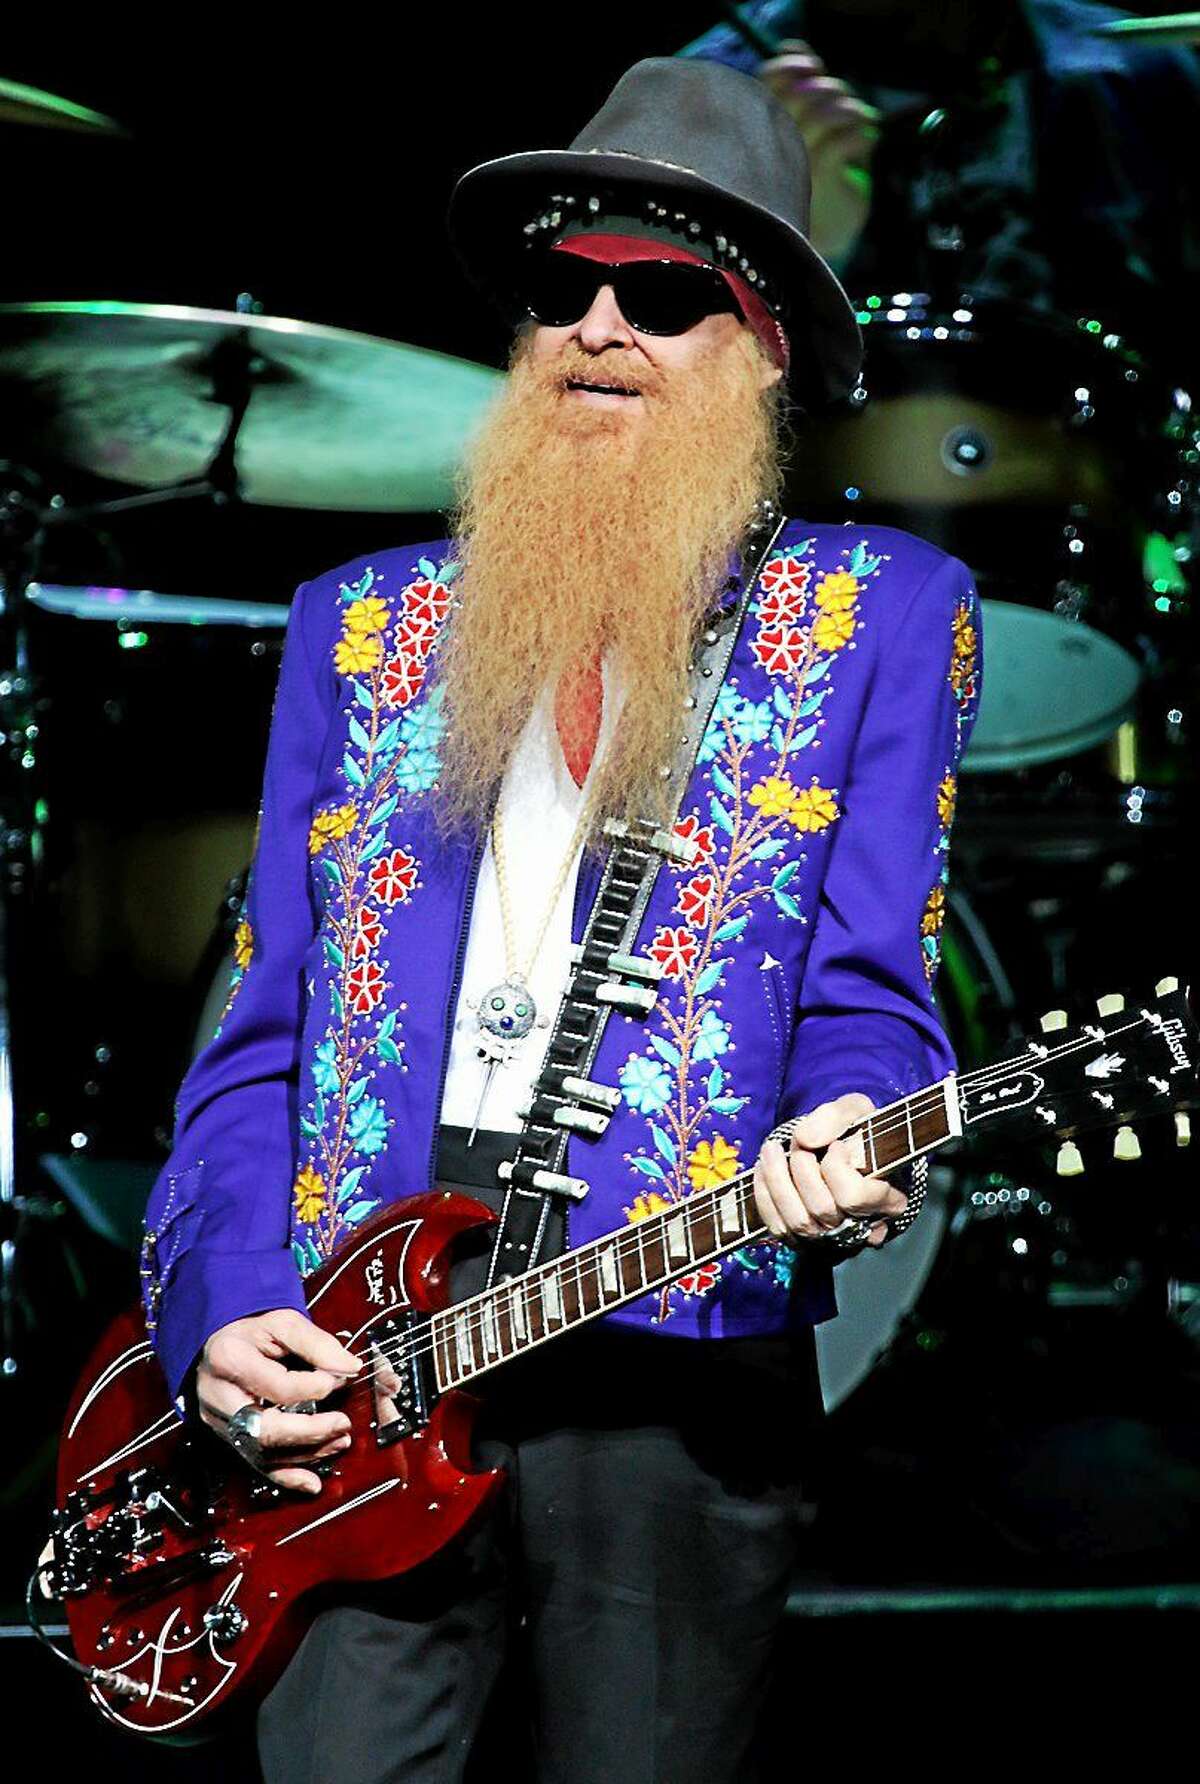 Photo by John Atashian ZZ Top singer and guitarist Billy Gibbons is shown performing on stage with the Kings of Kaos during the band's concert appearance at the Foxwoods Resorts & Casino on Saturday, May 16. The supergroup of all star musicians rocked the capacity crowd of fans all night long.